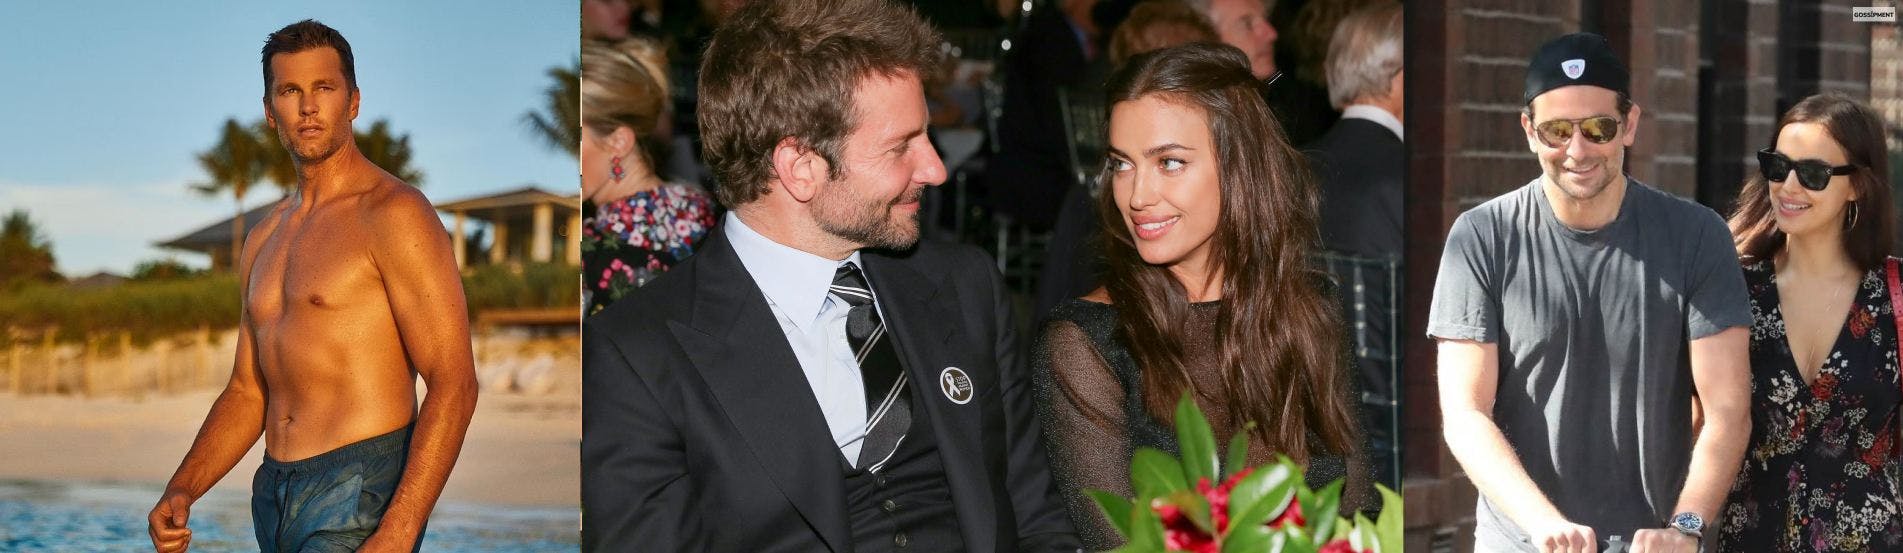 Cover Image for Though Playing With Tom Brady, Irina Shayk Is Ready To Marry Bradly Cooper